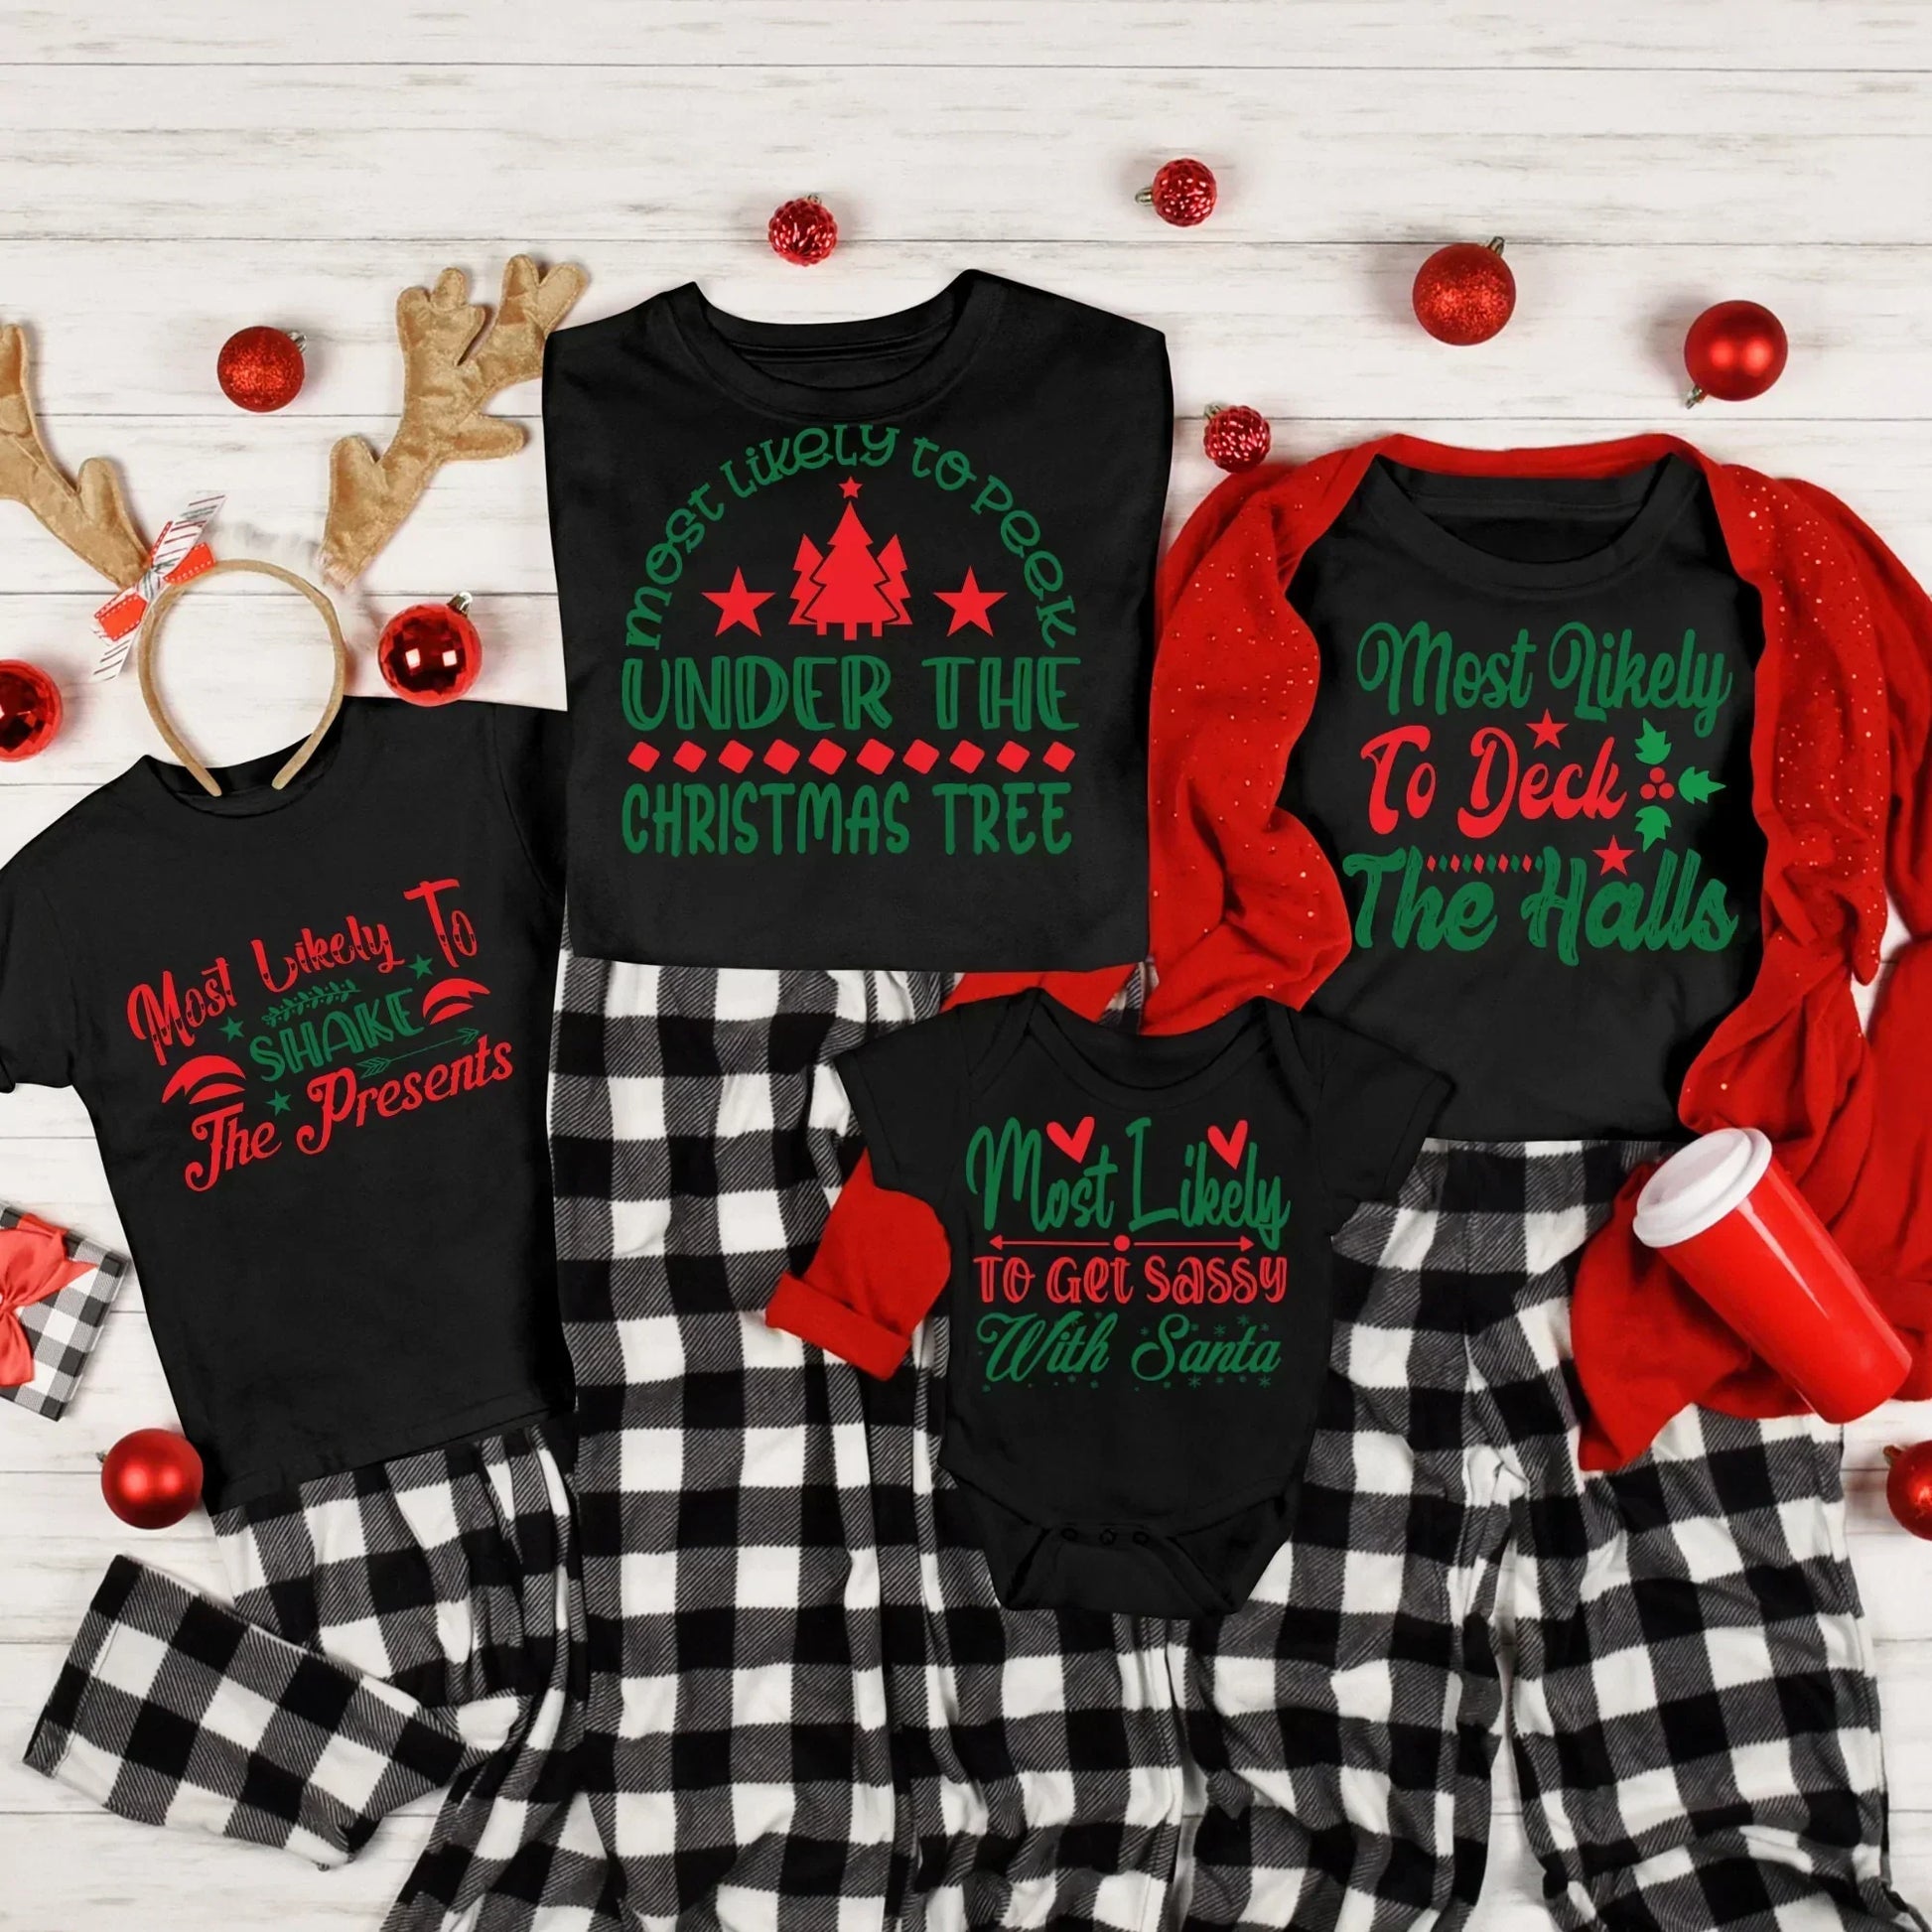 Most Likely To Christmas Family Shirts